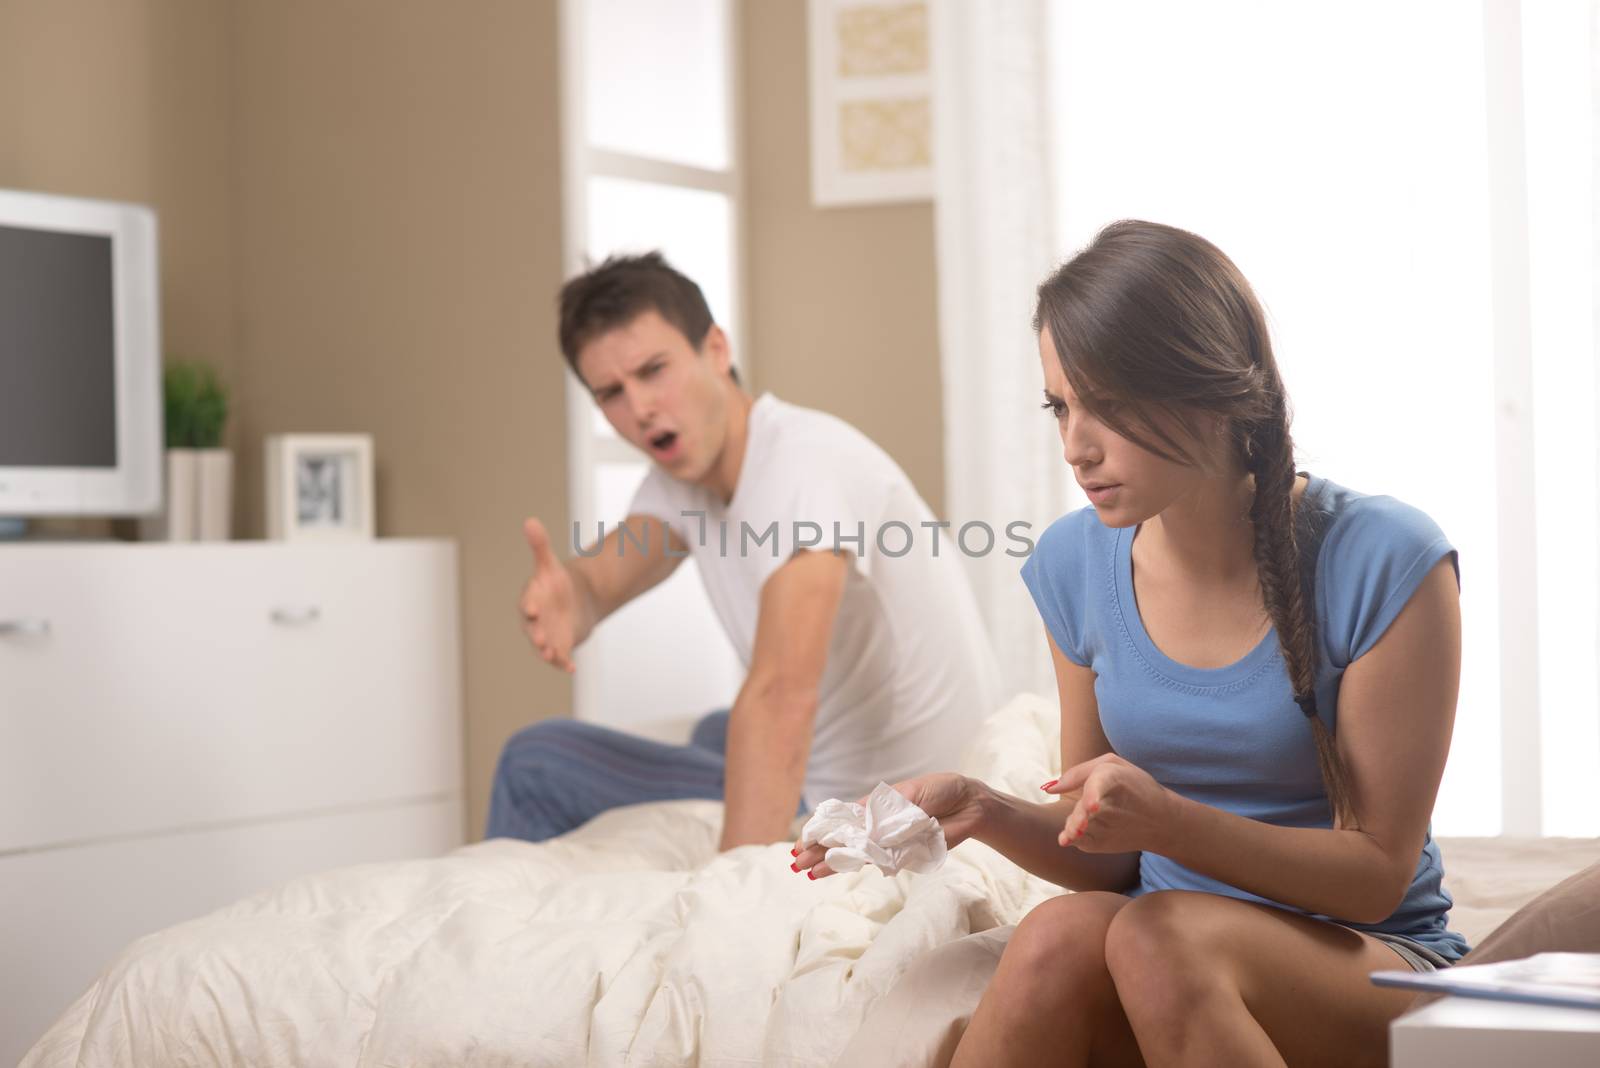 Man screaming on woman, couple having conflict 